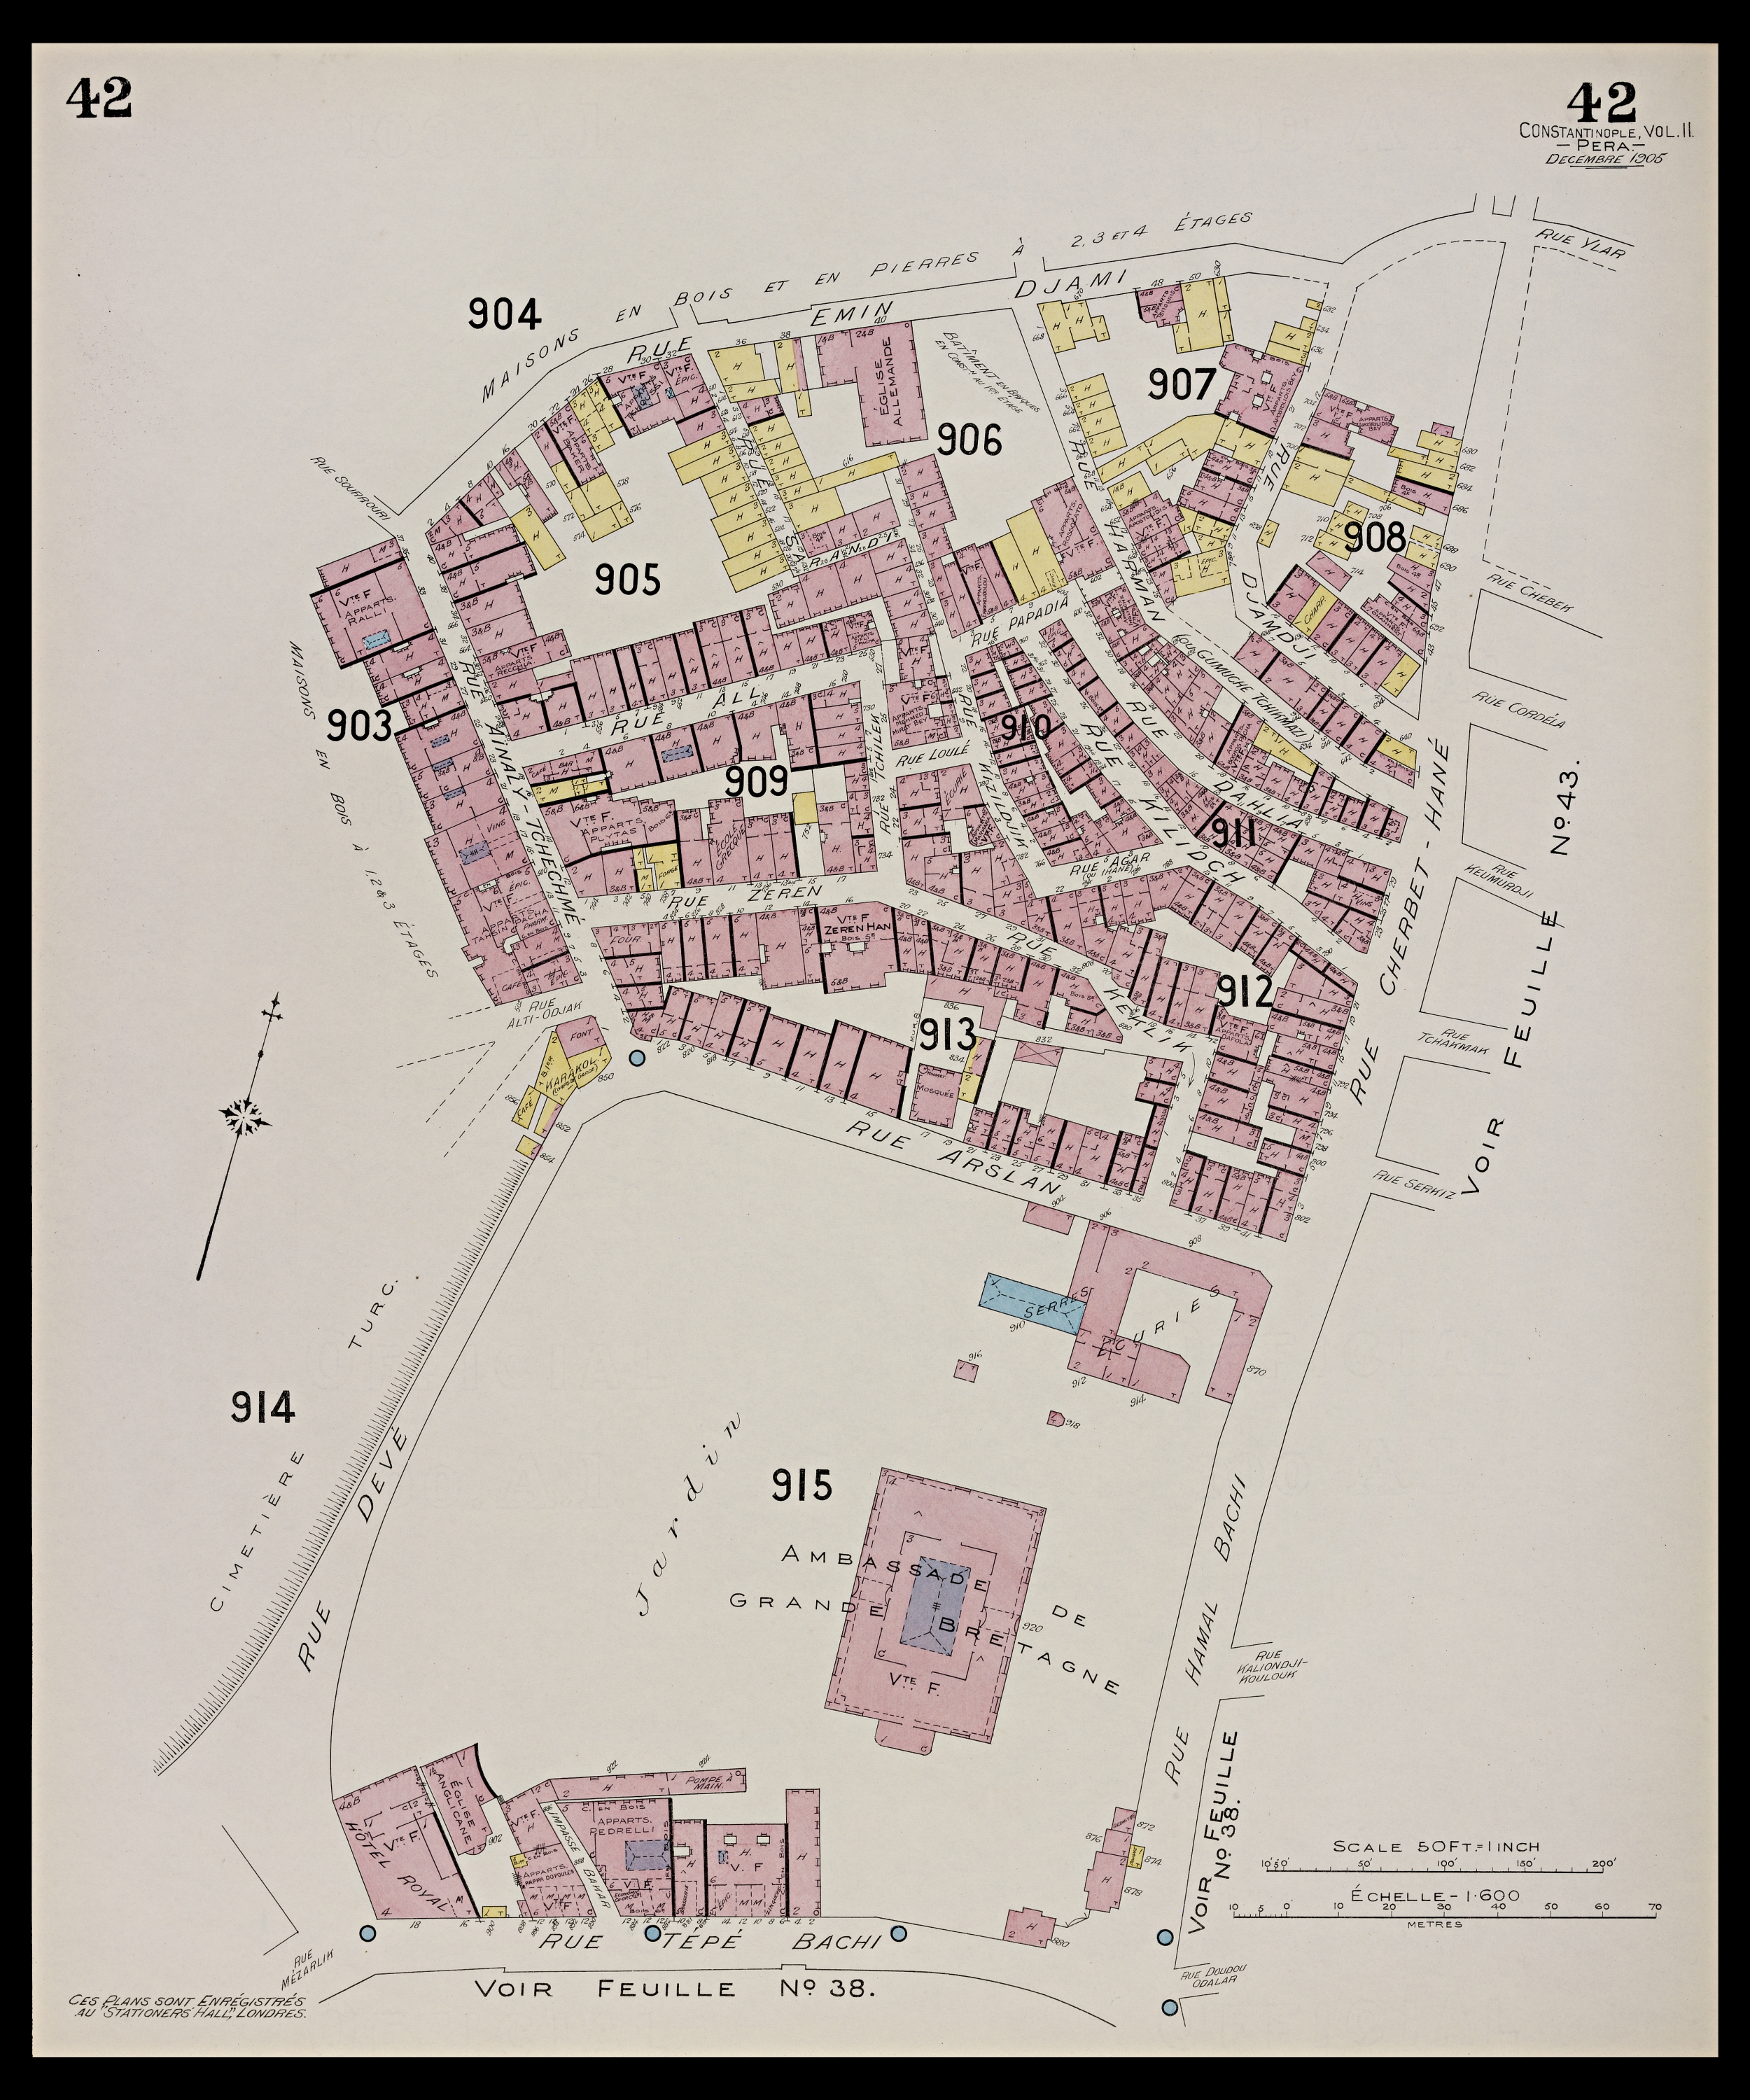 Charles E. Goad - <span style="color: rgb(1, 1, 1); line-height: 16px;">A sheet from the&nbsp;</span><span style="color: rgb(1, 1, 1); line-height: 16px; font-style: italic;">Plan d'Assurance de Constantinople&nbsp;</span><span style="color: rgb(1, 1, 1); line-height: 16px;">(Insurance Plan of Constantinople)</span><span style="color: rgb(1, 1, 1); line-height: 16px;">. The complete set of plans is available on&nbsp;</span><a href="http://archnet.org/publications/10288" target="_blank" data-bypass="true" style="line-height: 16px;">Archnet</a><span style="color: rgb(1, 1, 1); line-height: 16px;">.</span>